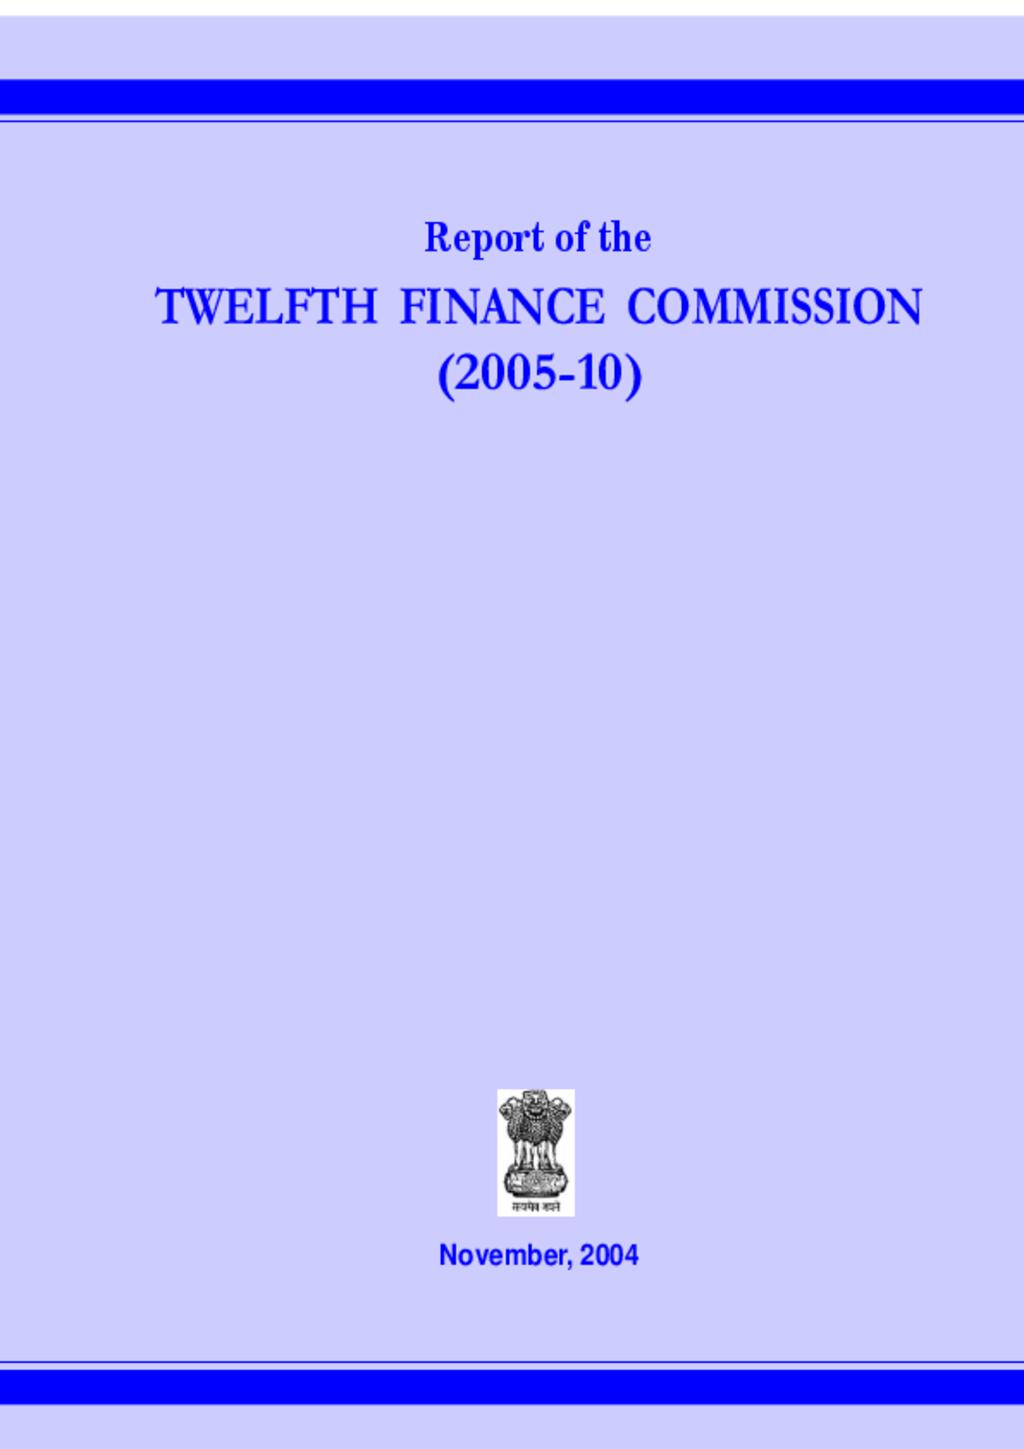 Report of the Twelfth Finance Commission (2005-2010)